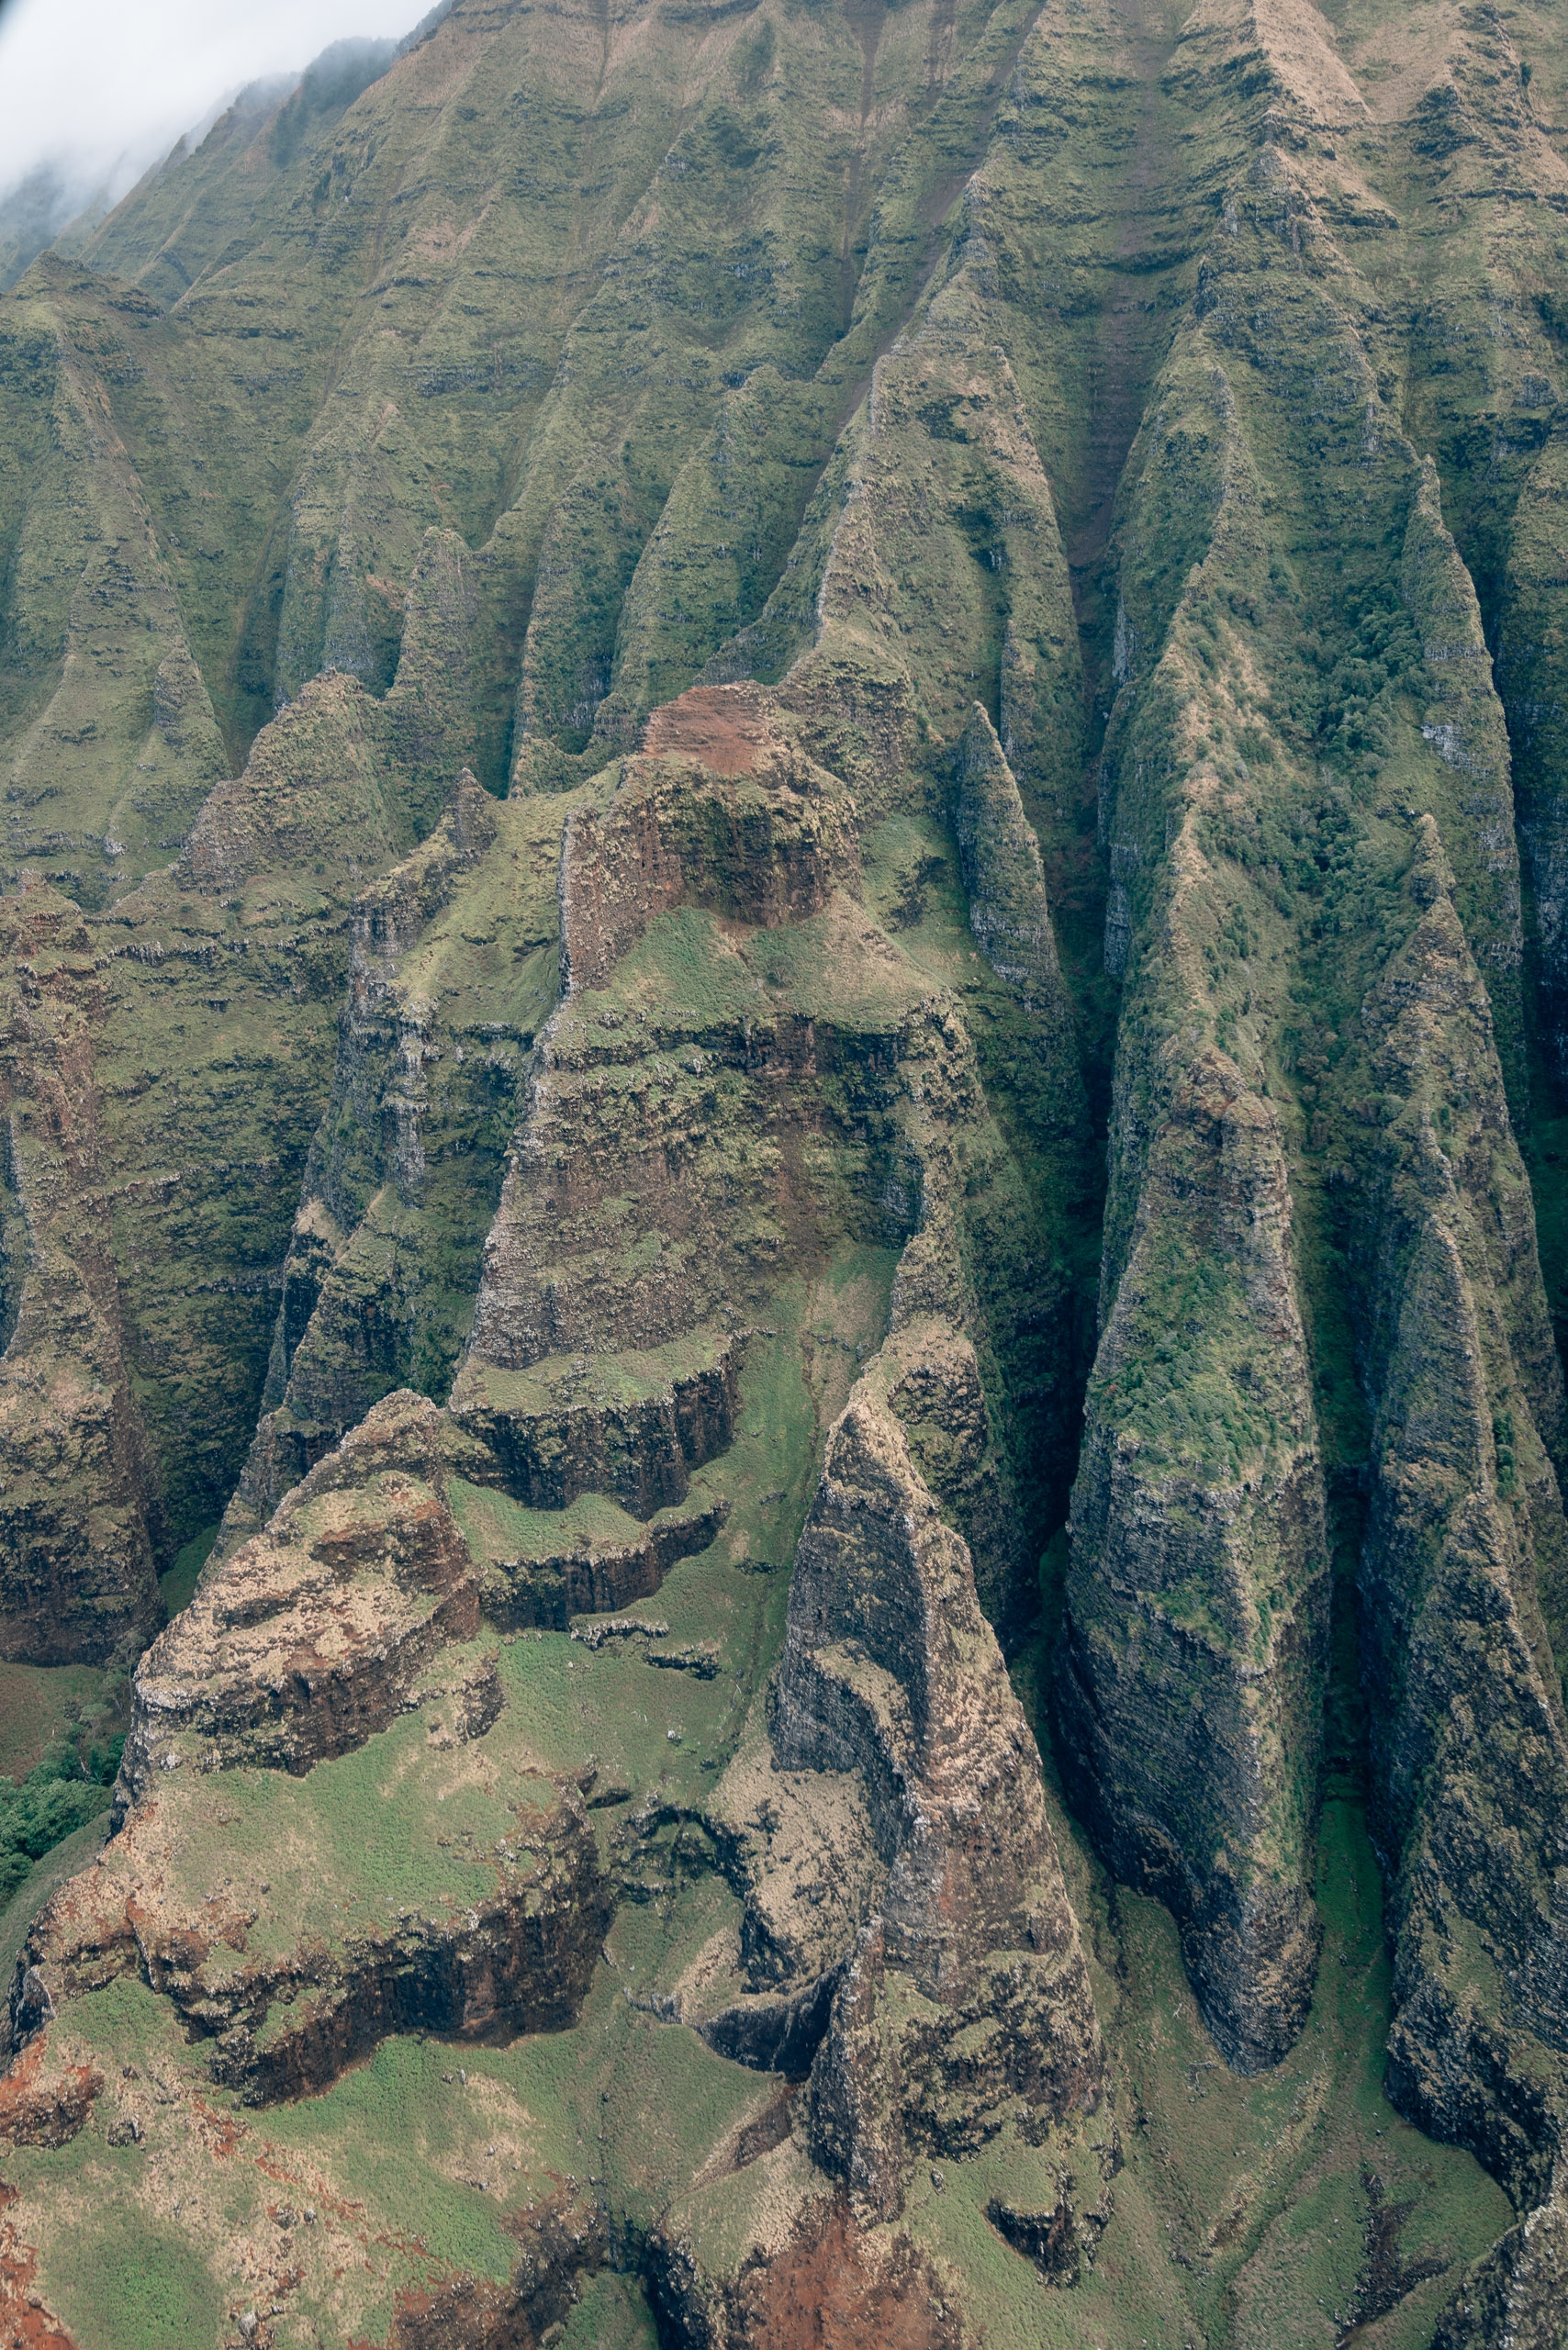 The Cathedrals of the Napali Coast